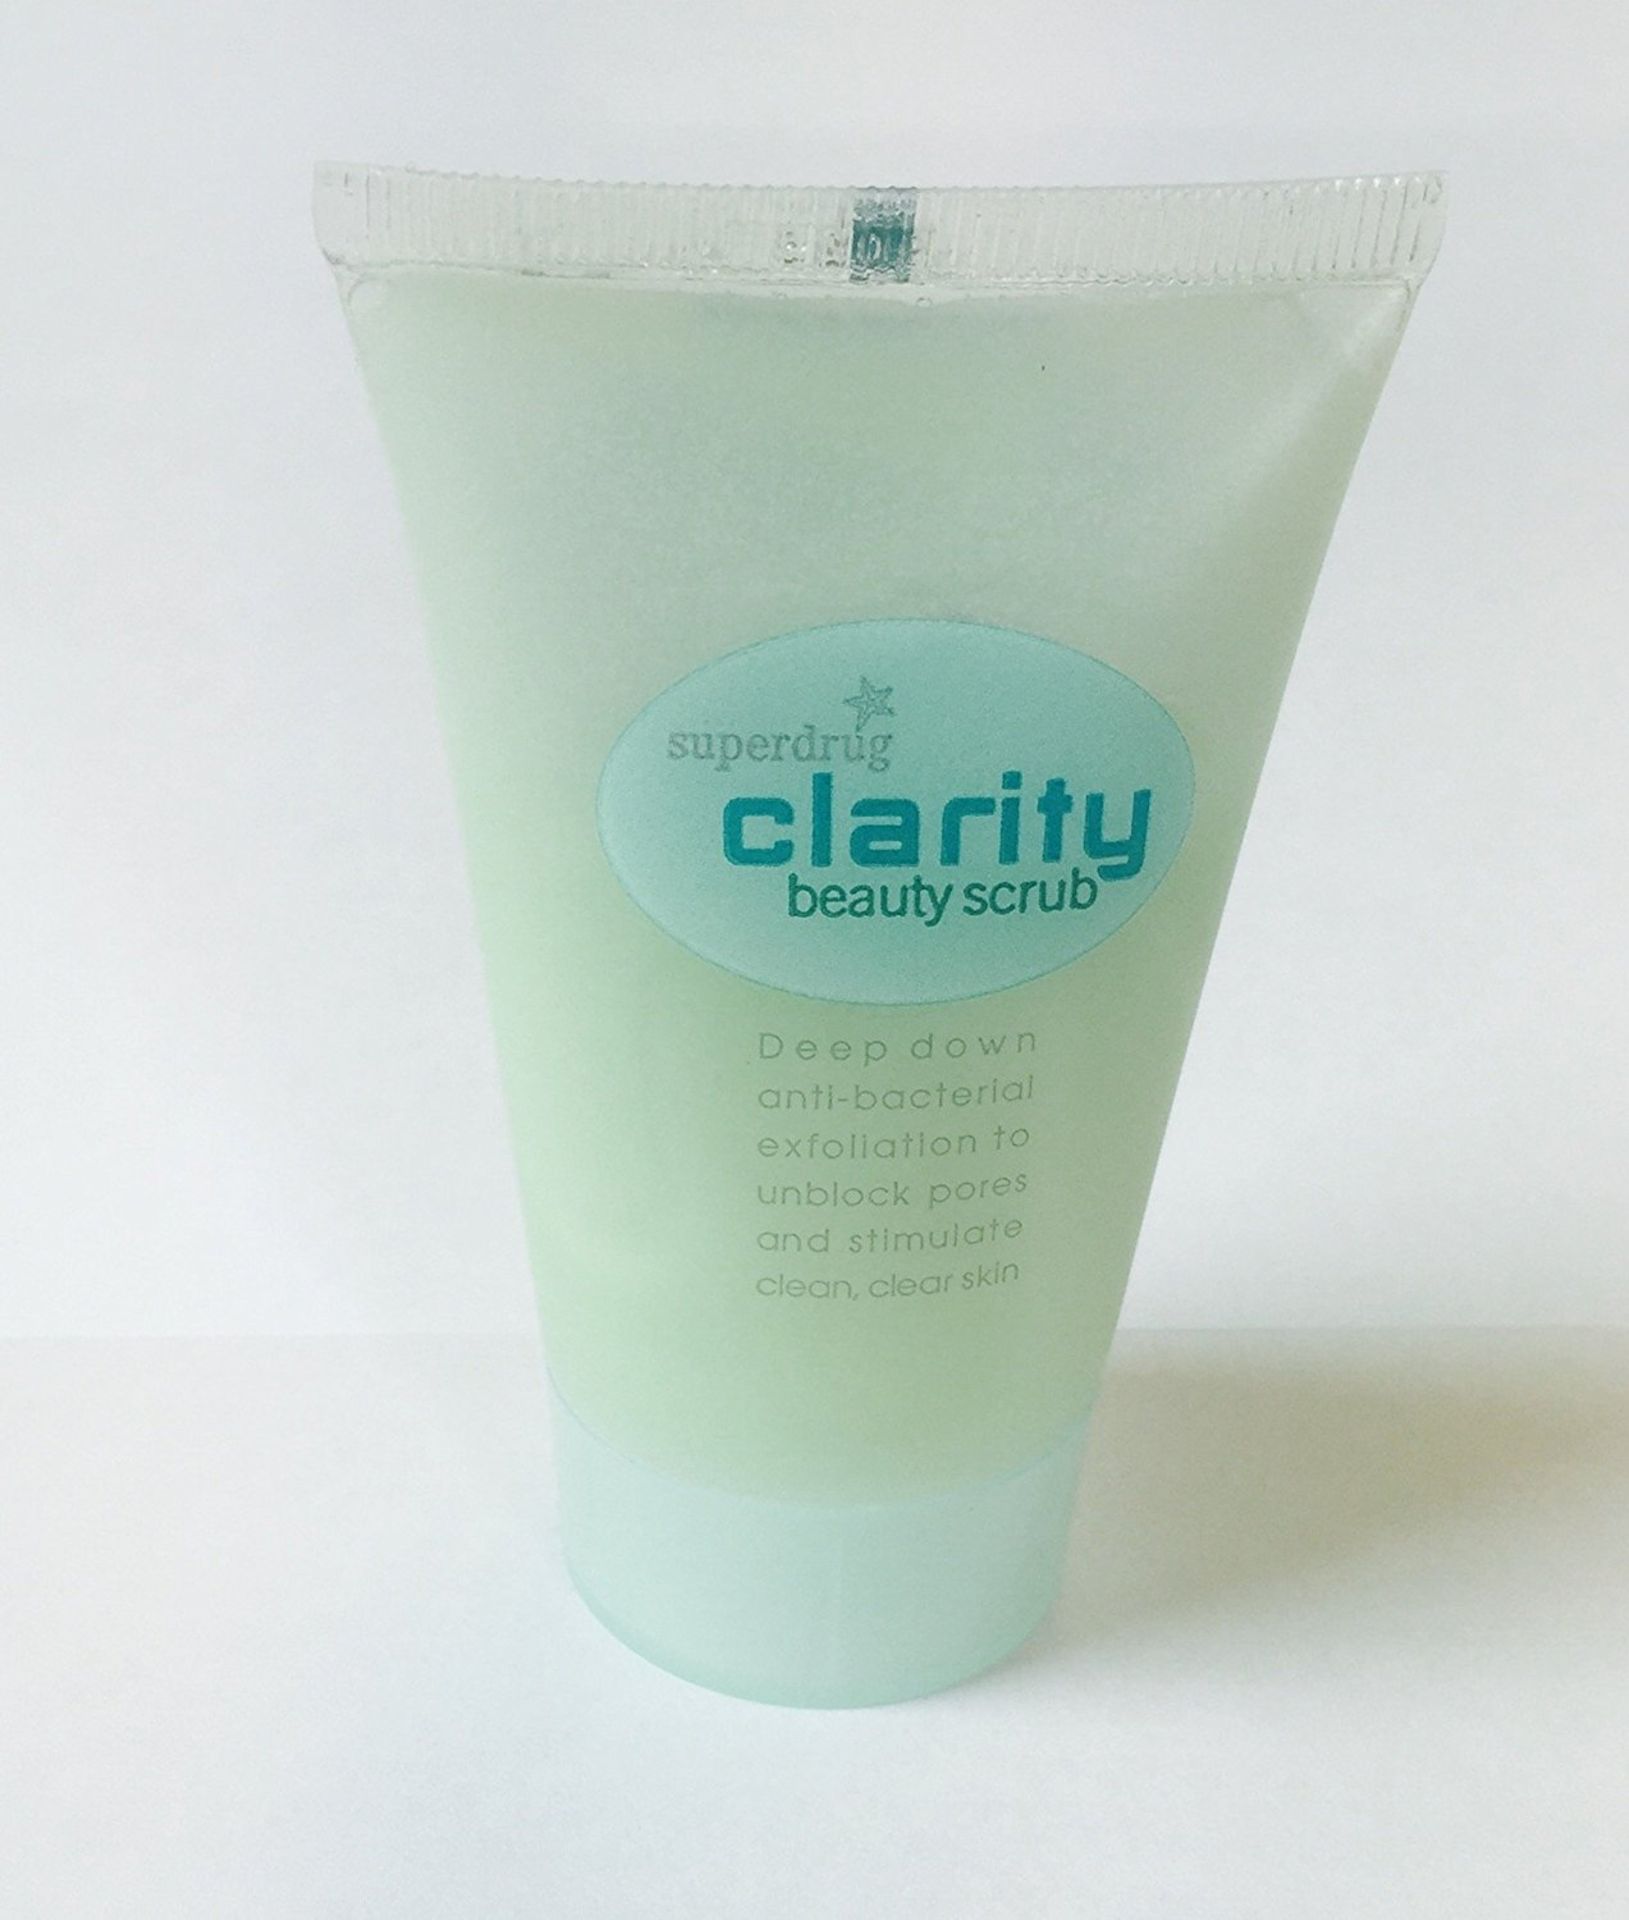 48 x Superdrug, Clarity Beauty Scrub, Anti-Bacterial Exfoliation (Delivery Available) 3.5''